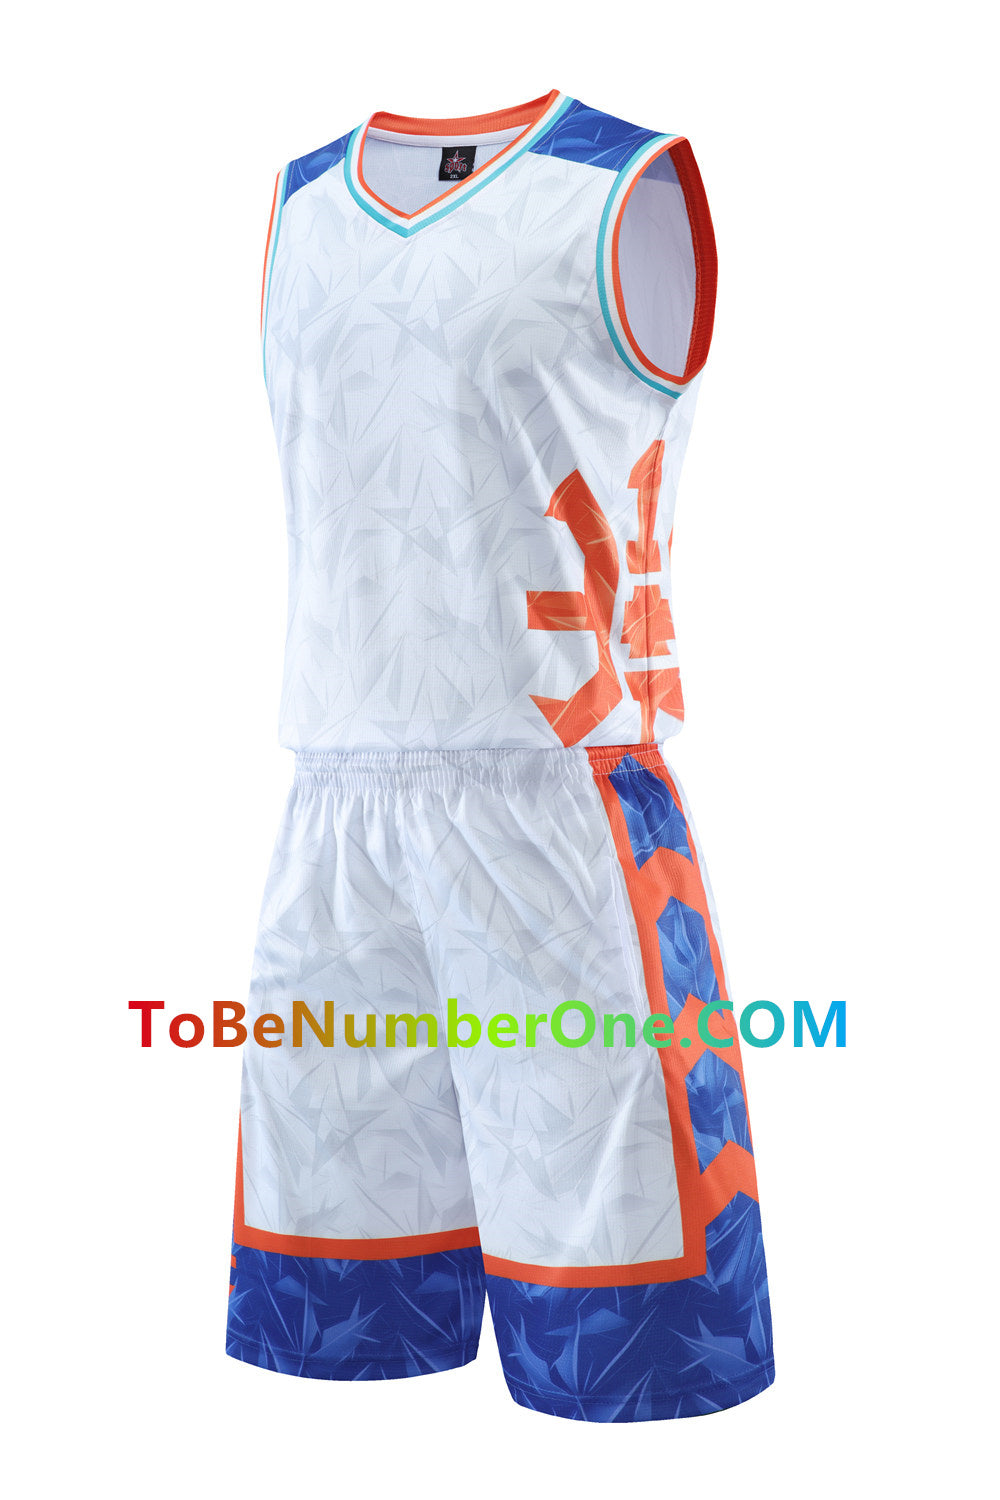 Customize instock High Quality Quick-drying basketball jerseys&shorts with pocket 218# print with team name , player and number.